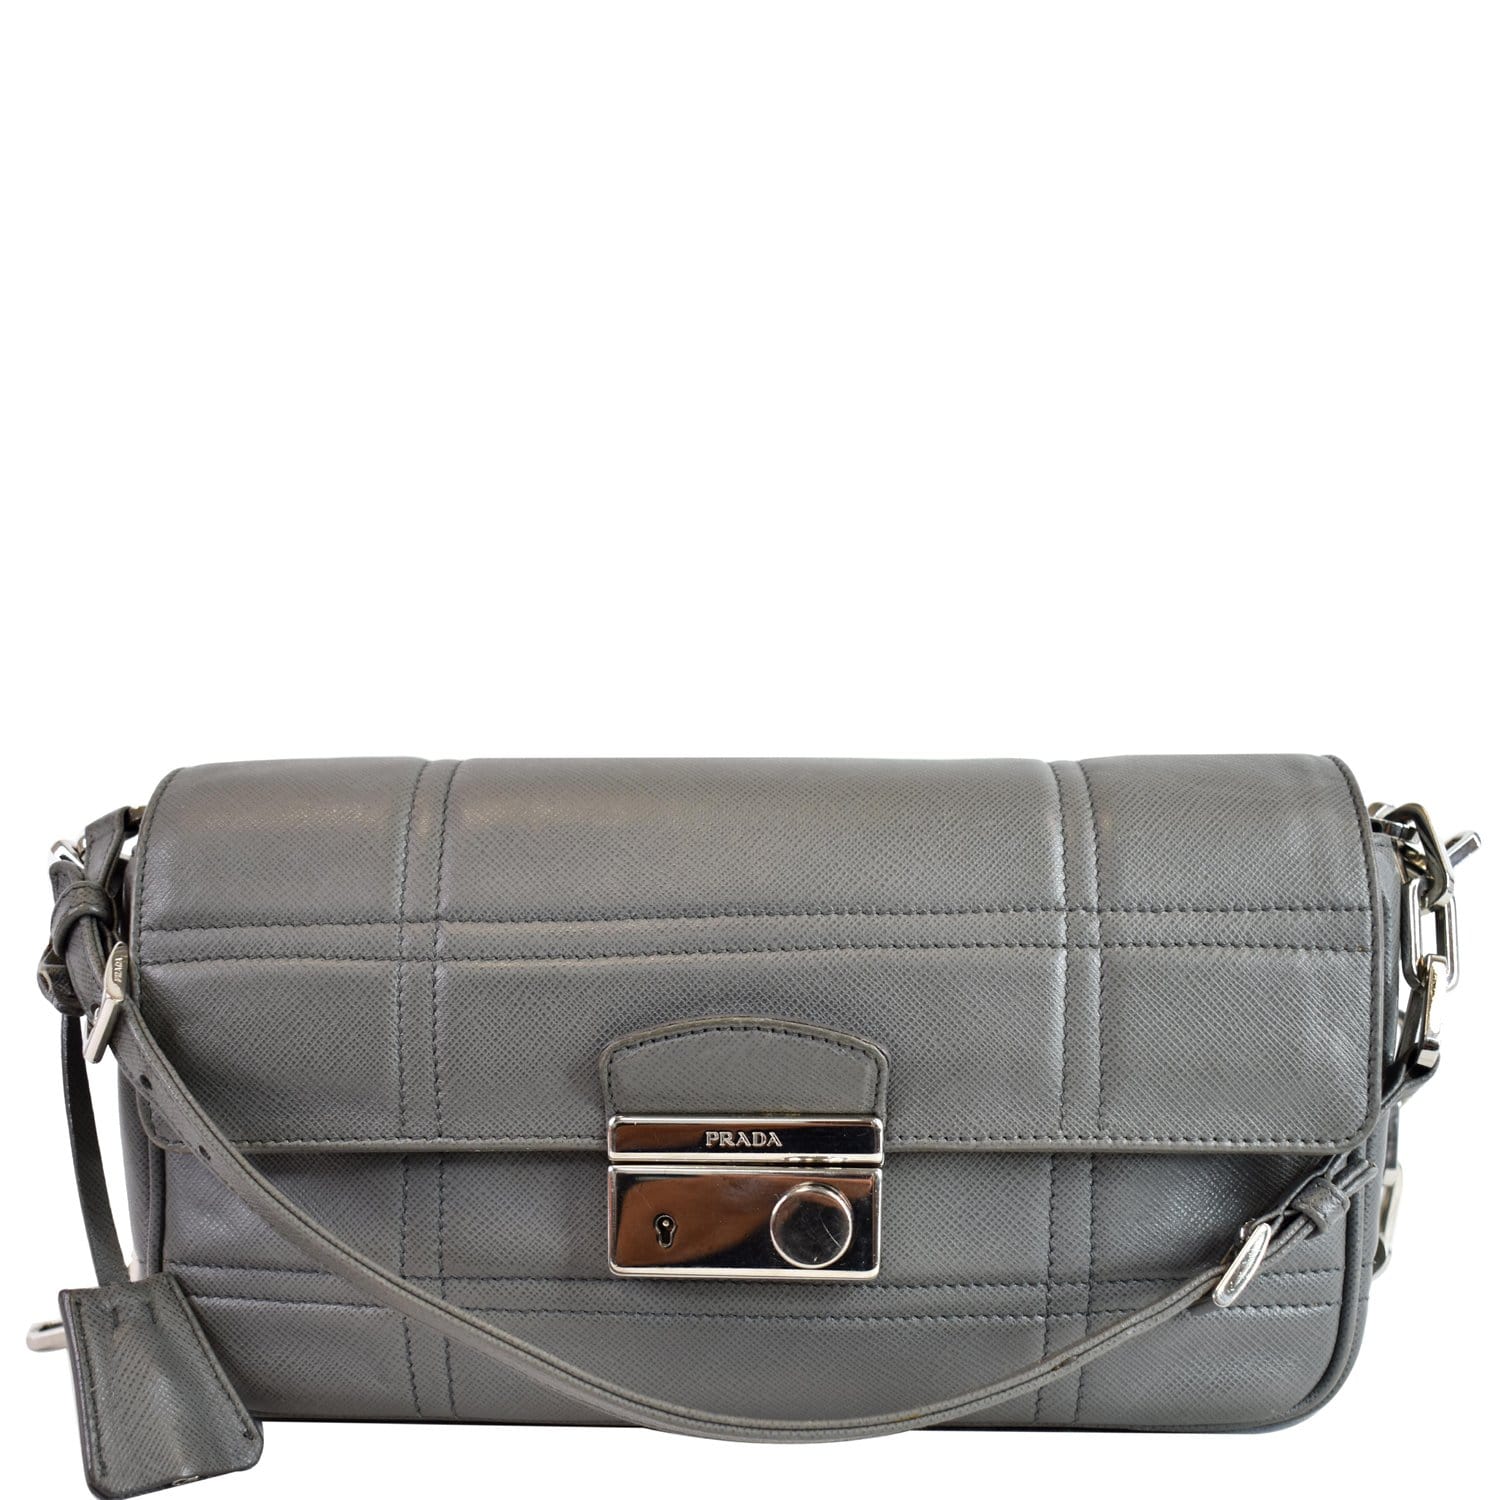 Prada Saffiano Lux Casual Style Unisex 2way Plain Leather Office Style, Grey